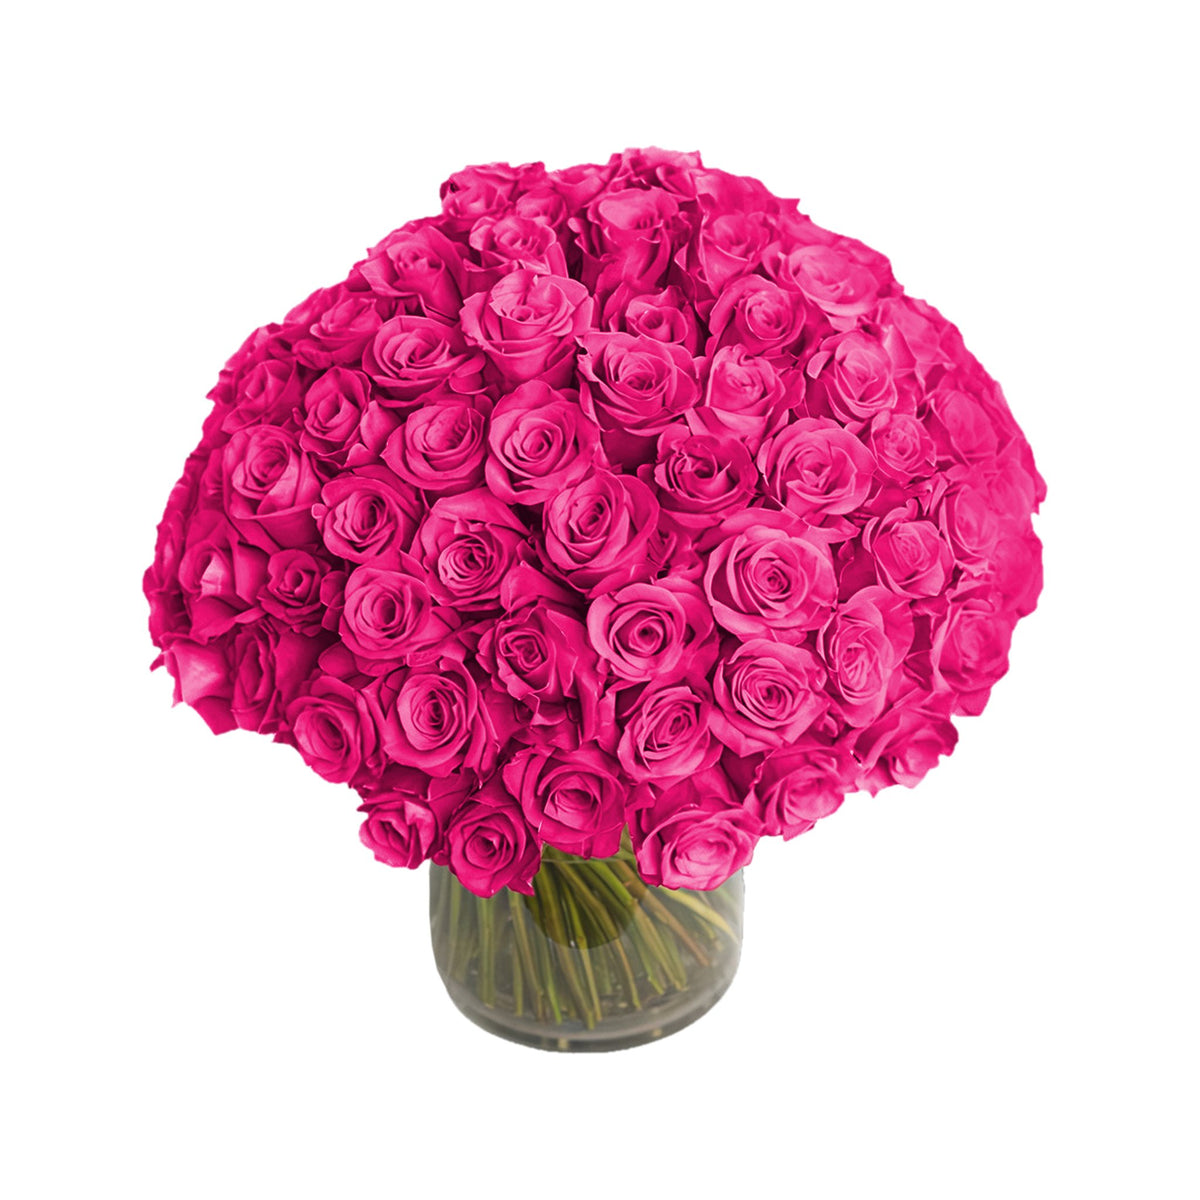 Queens Flower Delivery - Fresh Roses in a Crystal Vase | Hot Pink - 100 Roses